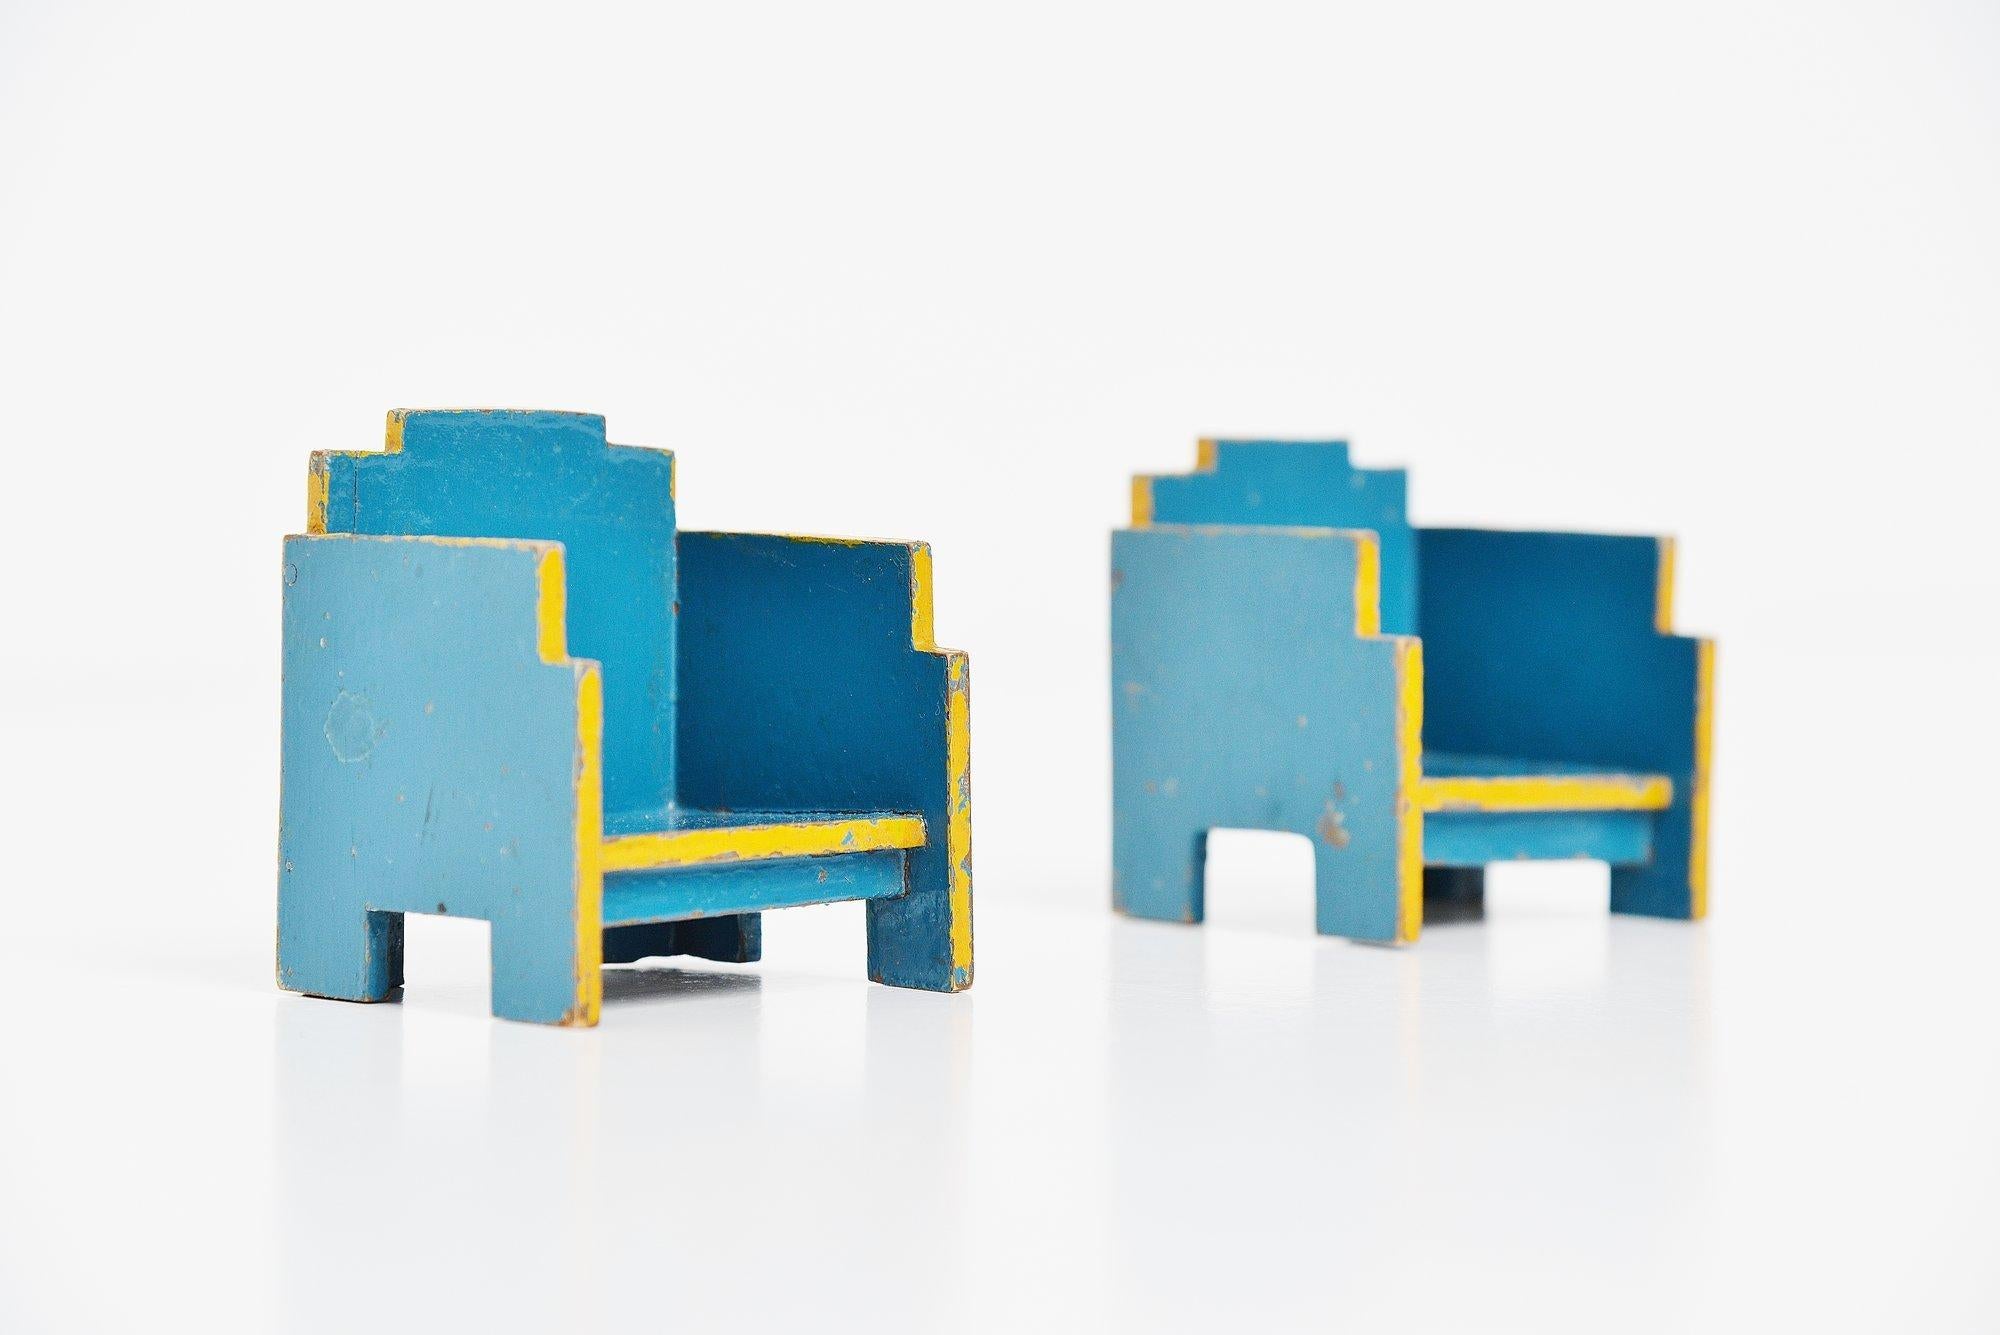 Very nice decorative wooden toy chairs set, designed by Ko Verzuu for Ado Holland in the 1932. Ado means Arbeid door onvolwaardigen, translated; labor by incapacitated, which makes this an even more special piece. Toys by Ado are being highly